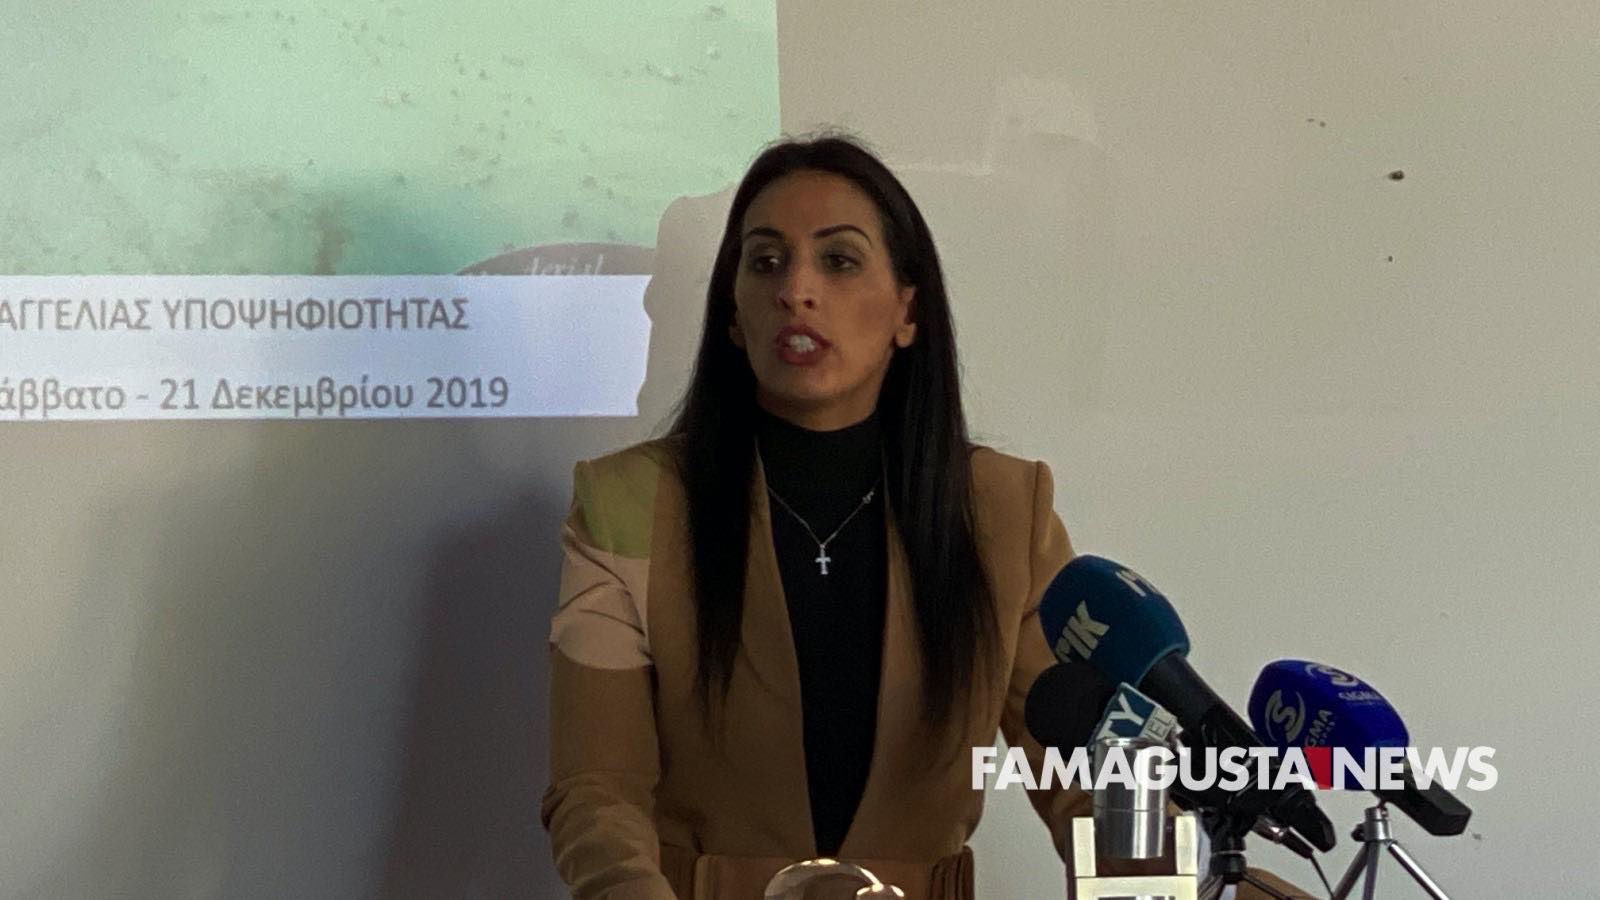 80686692 2548163842098702 3321351733879242752 n exclusive, Emilia Evangelou - Xydia, Municipality of Ayia Napa, Municipal Elections, Elections, Nea Famagusta, Local Government, CANDIDATE